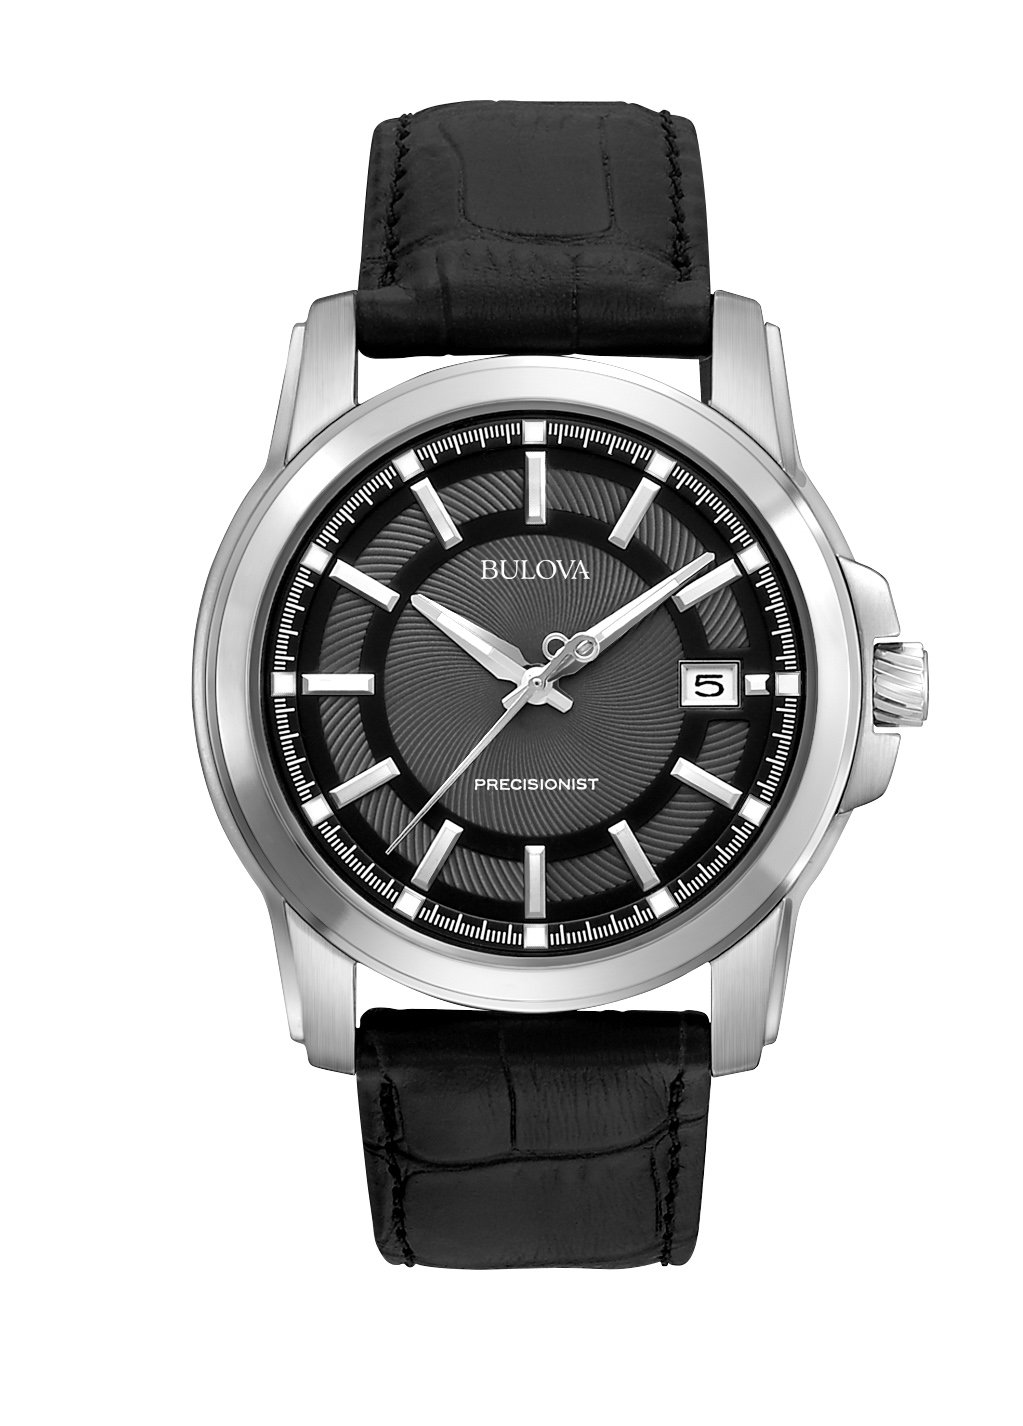 Bulova Men's Precisionist 3-Hand Calendar in Stainless Steel with Black Leather Strap and Black Patterned Dial Style: 96B158